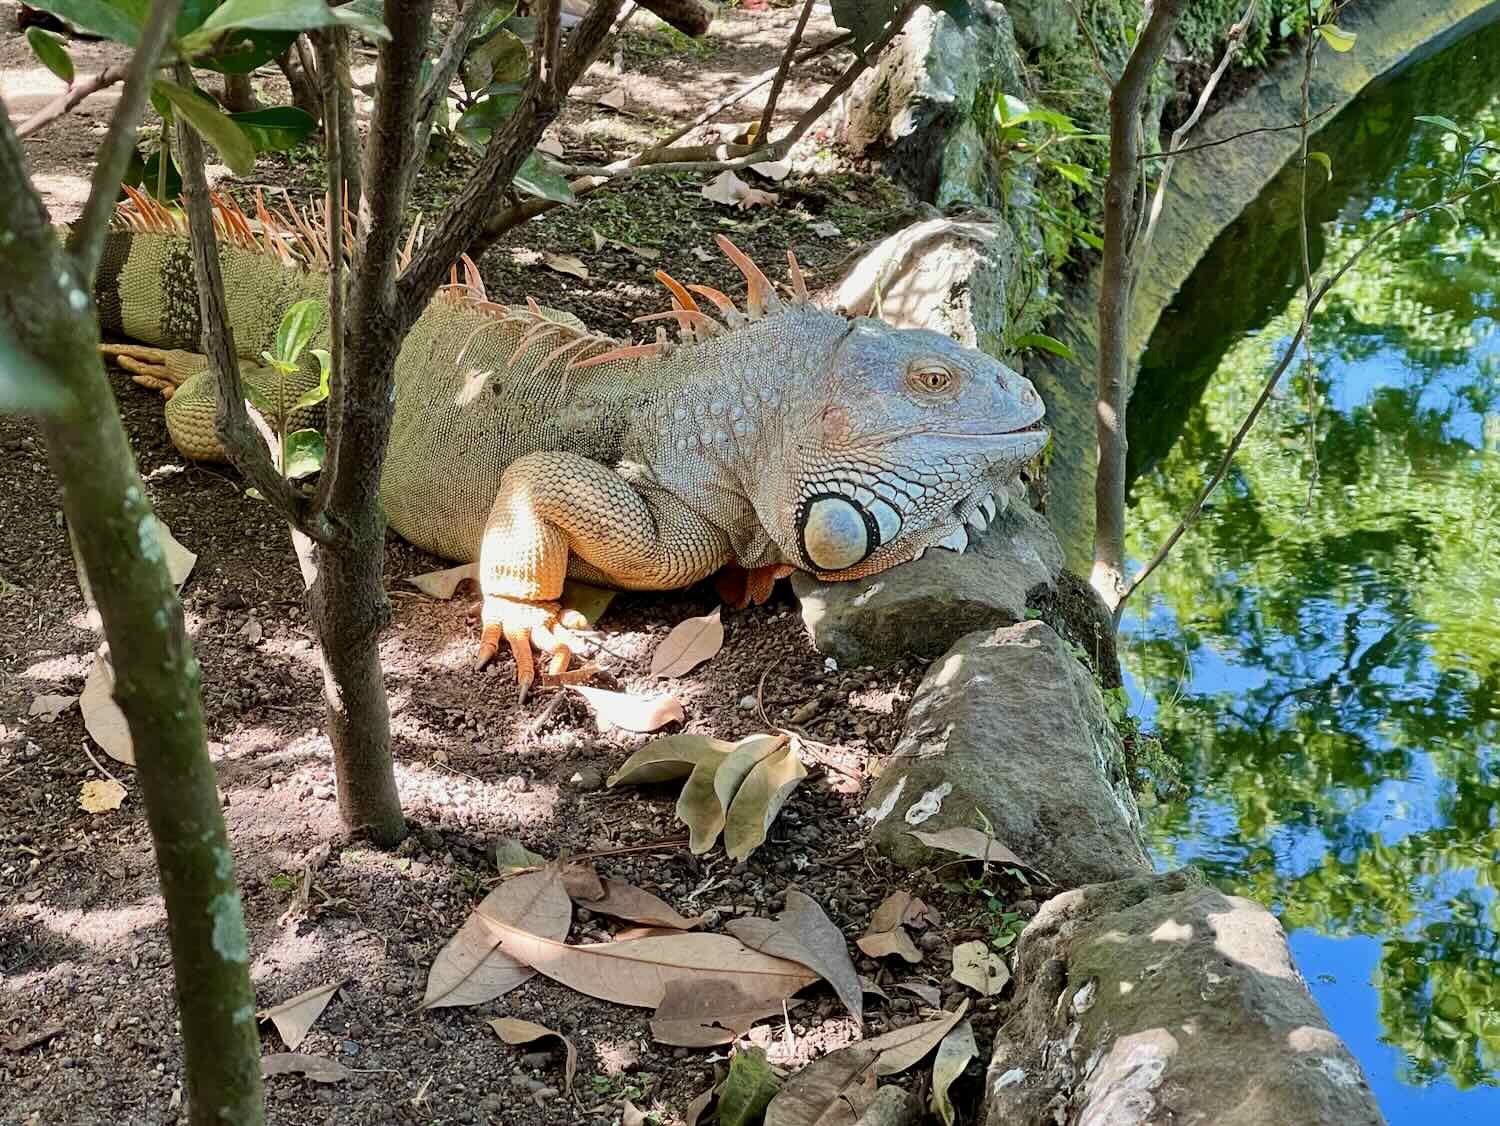 A particularly large green iguana lounged near one of the ponds